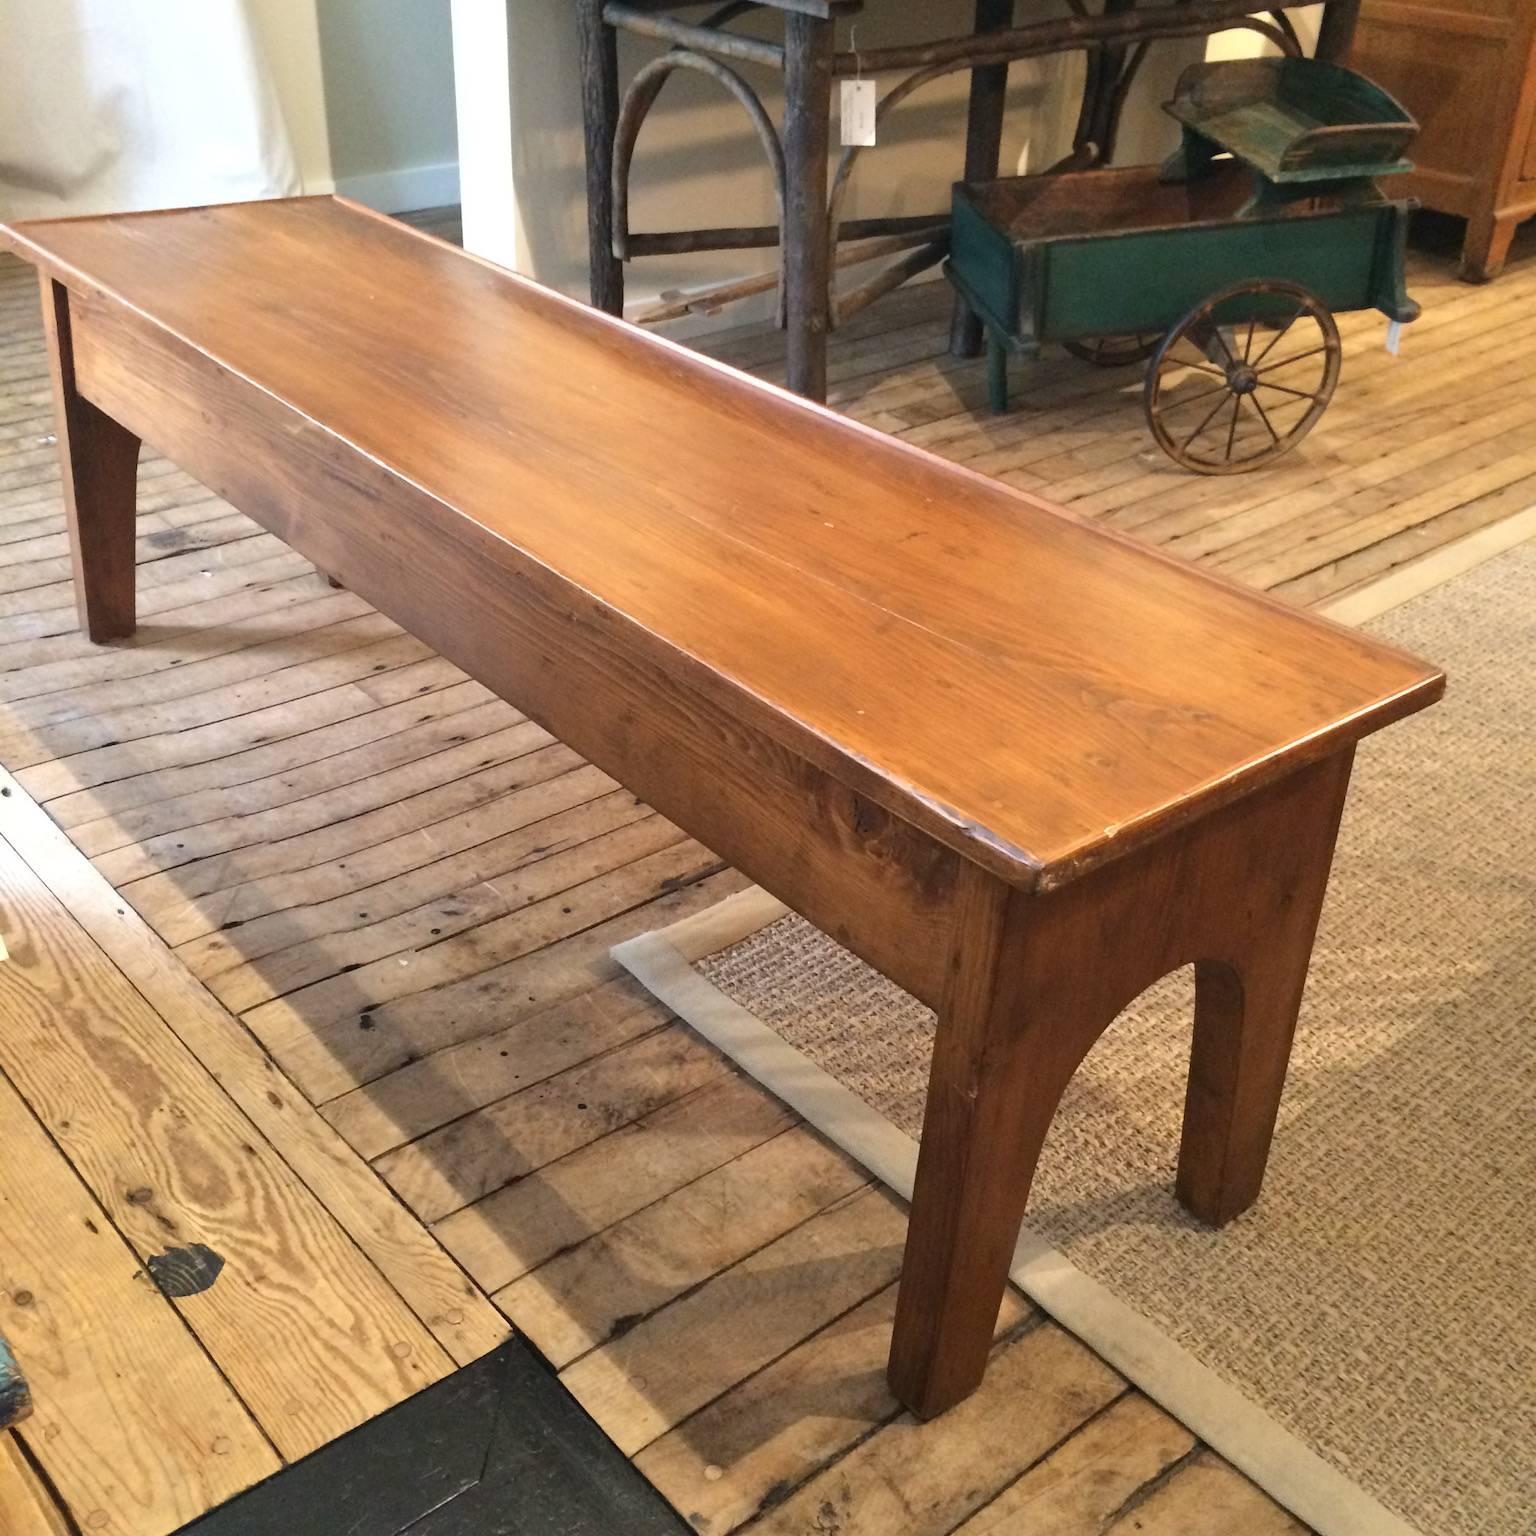 Former late 19th century, early 20th century school desk repurposed as coffee table.